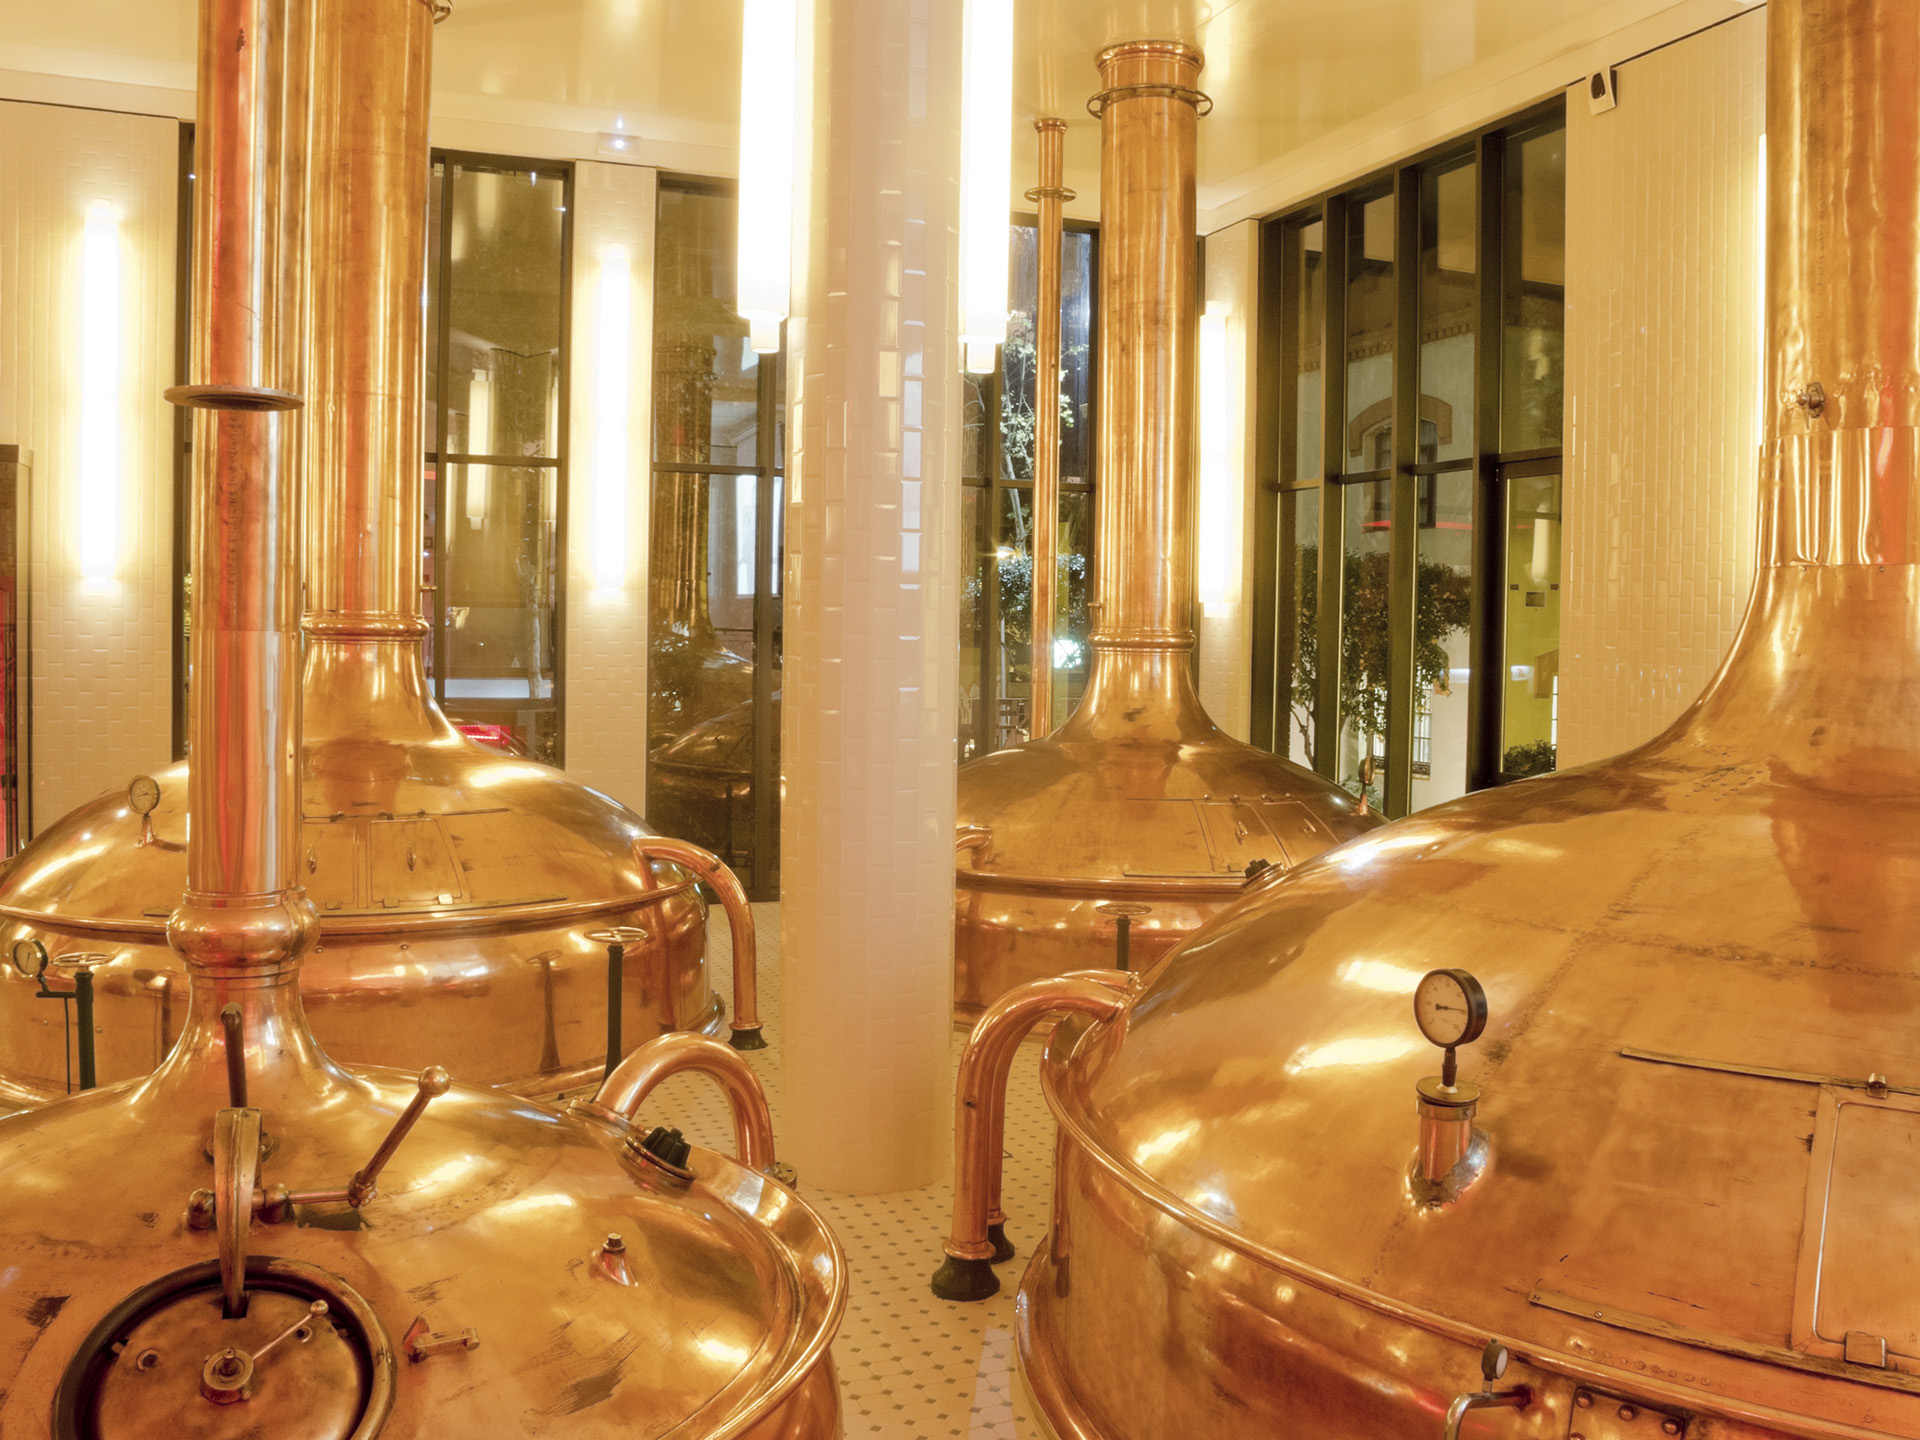 Brewery with copper distillery tanks